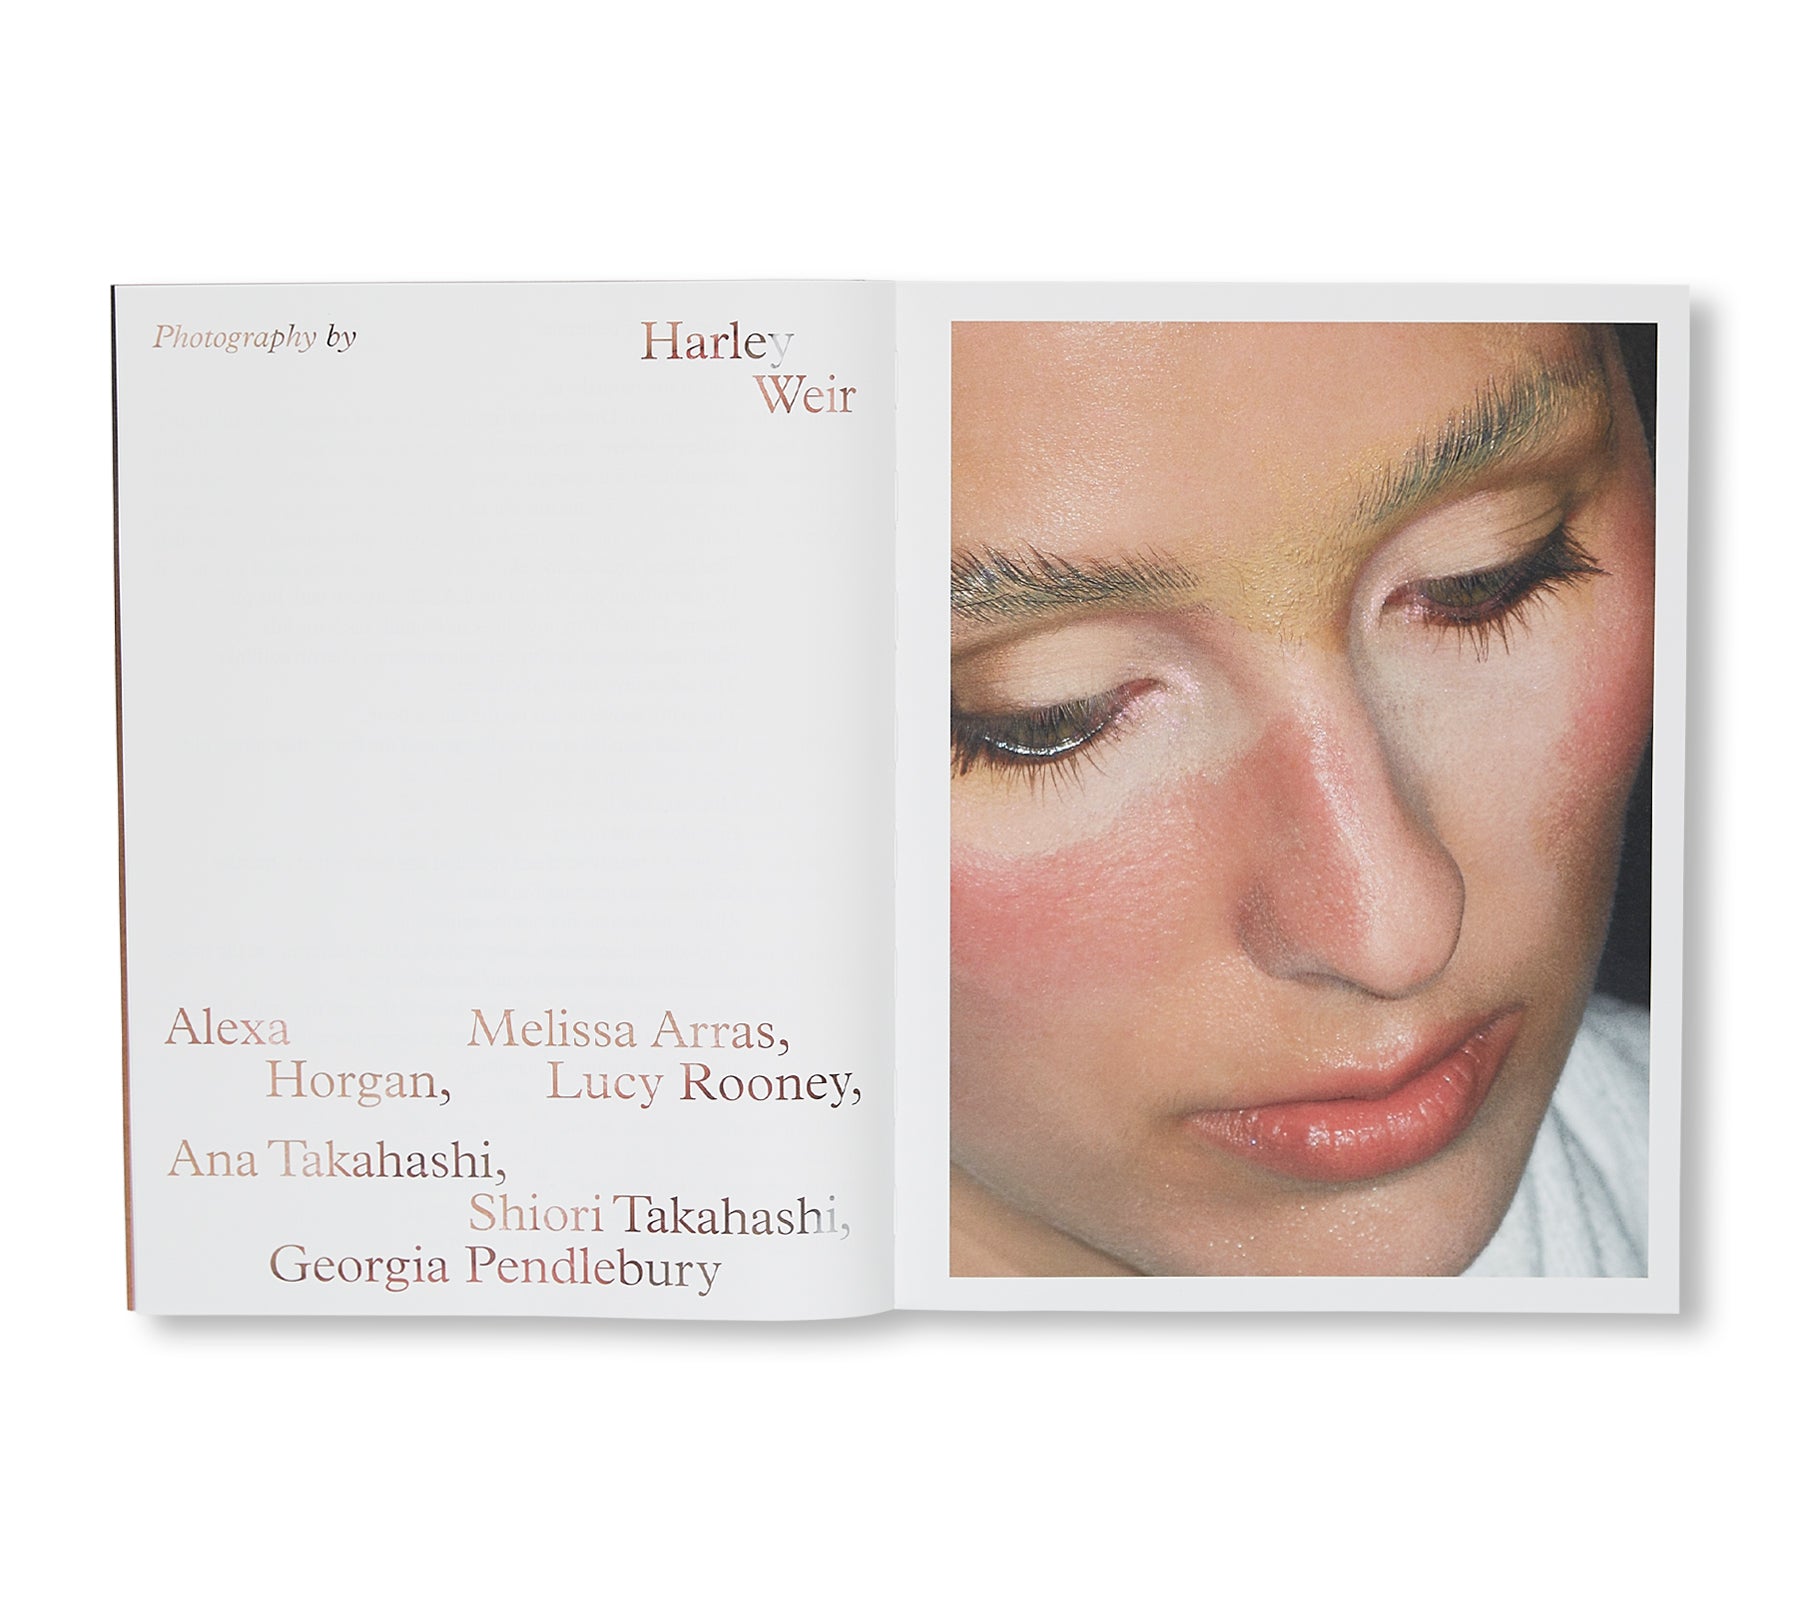 BEAUTY PAPERS by Harley Weir